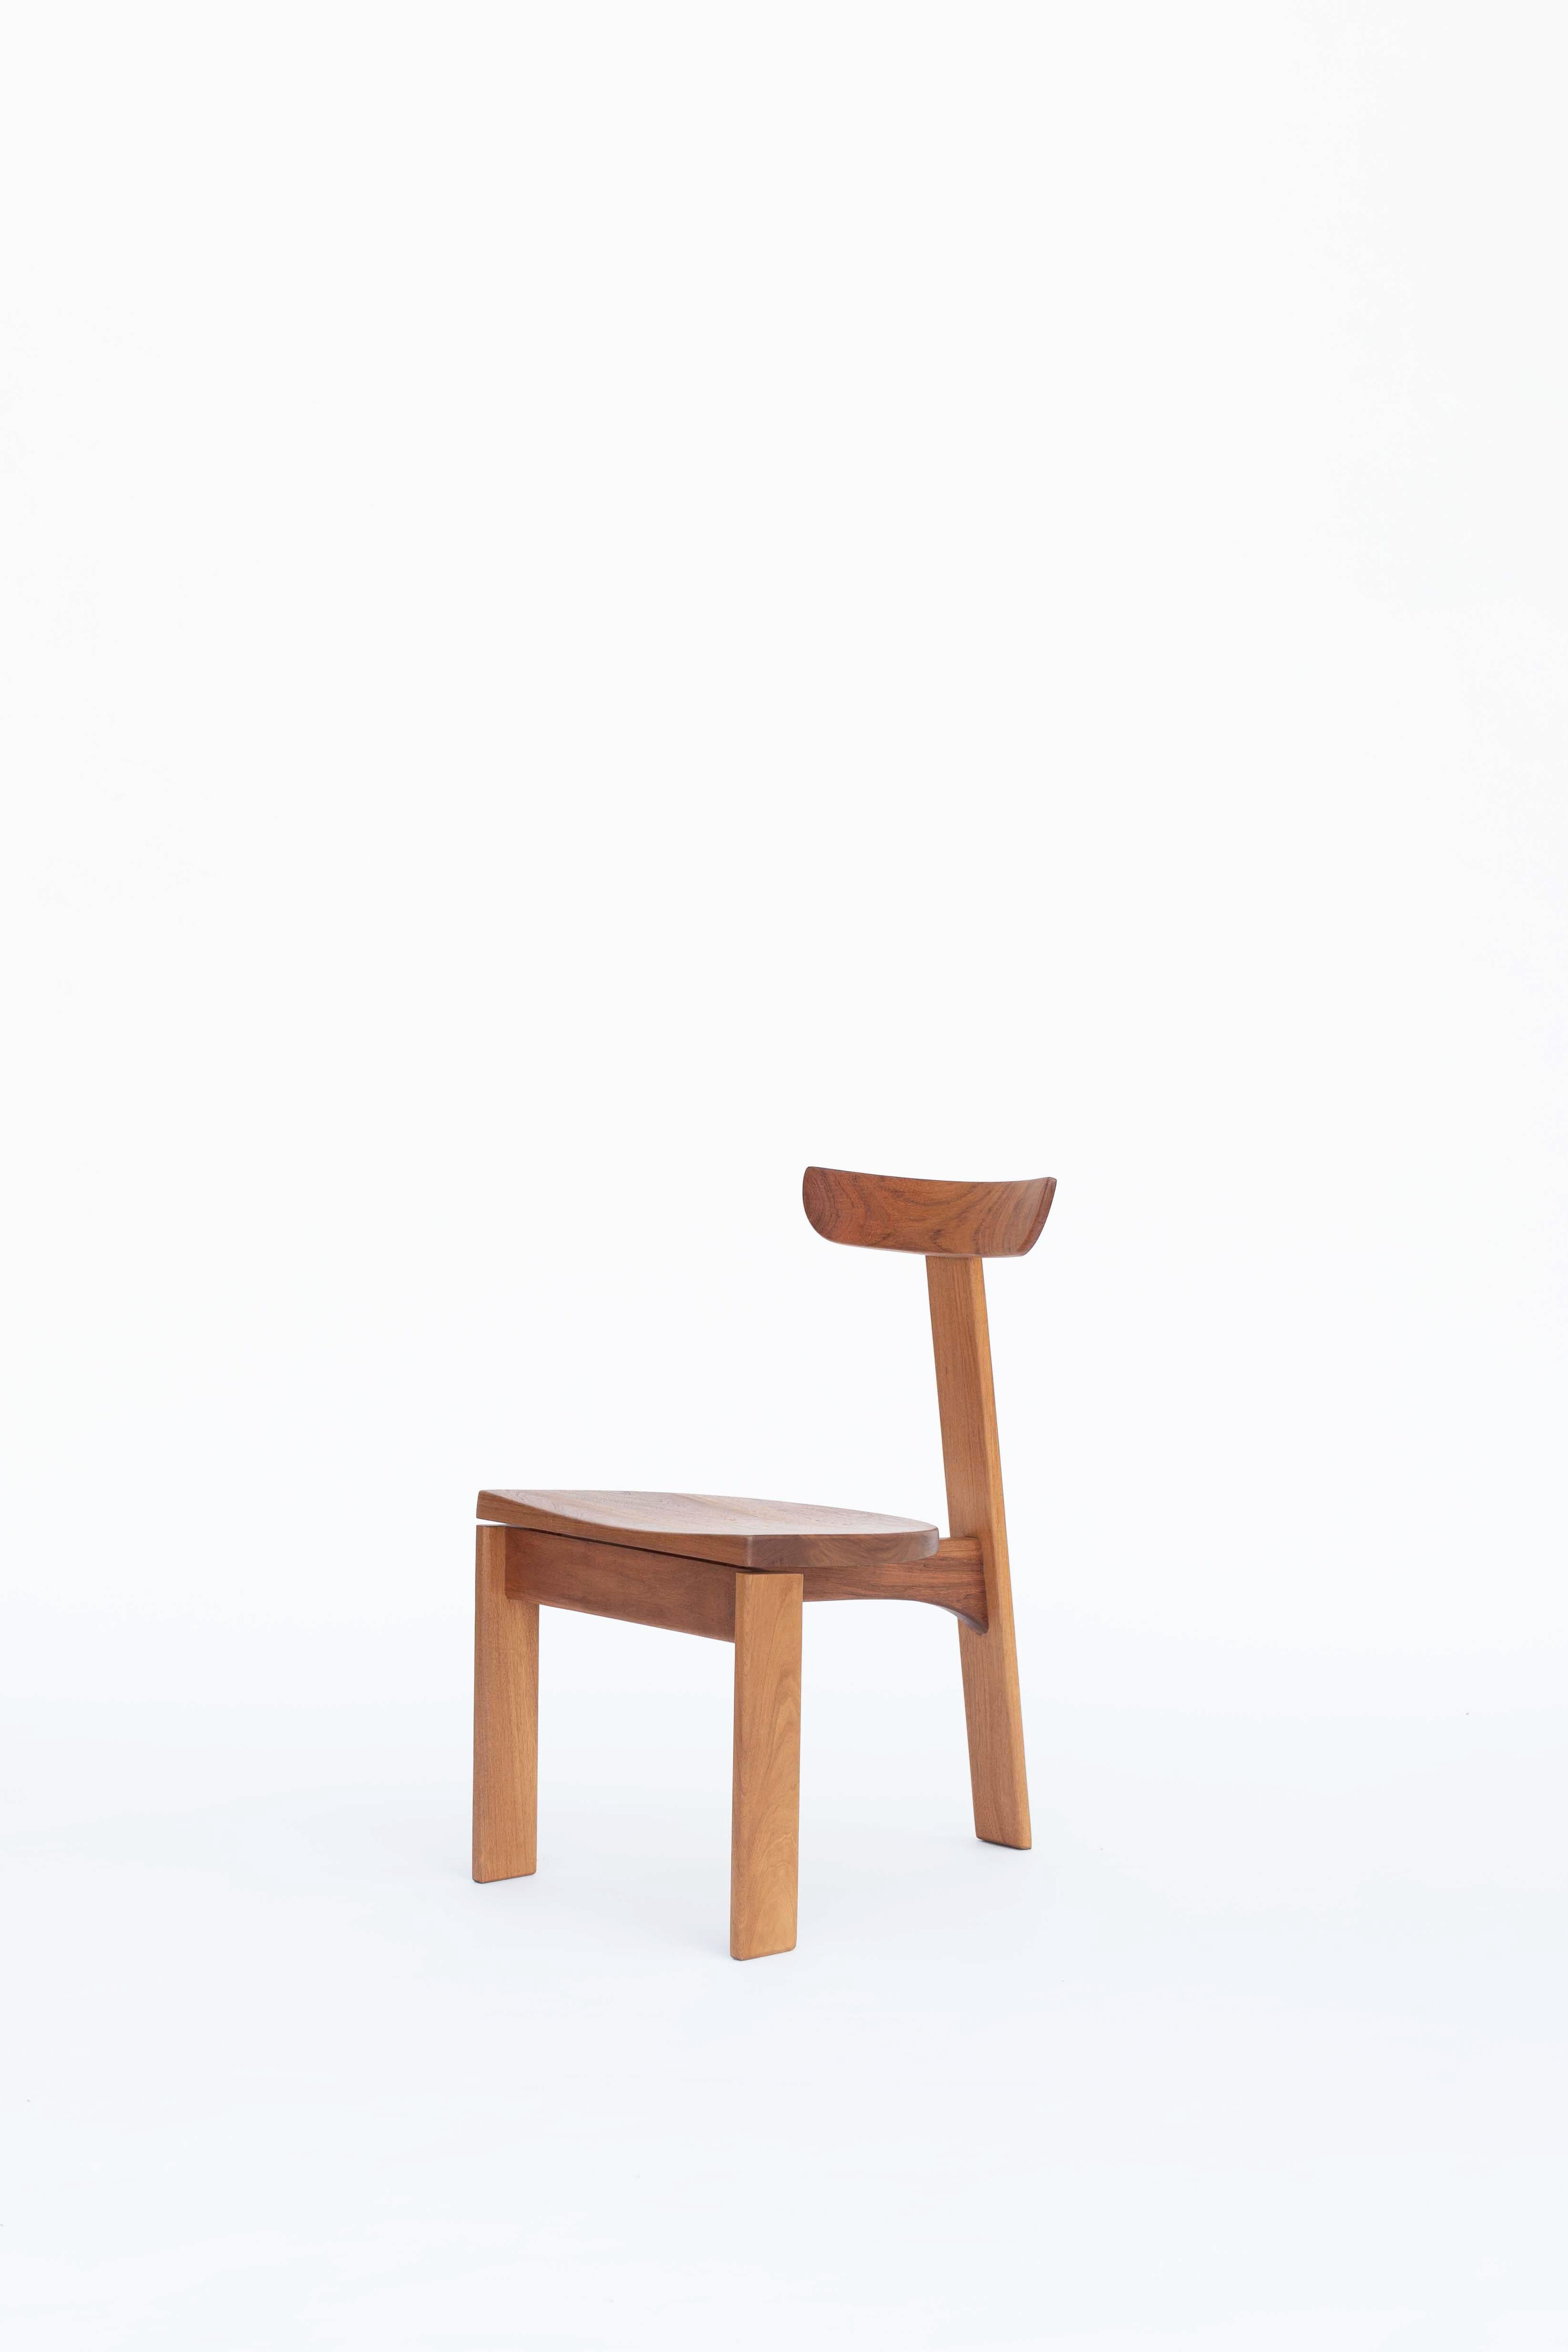 Woodwork Contemporary Dining Chair in Natural Solid Wood by Ania Wolowska For Sale